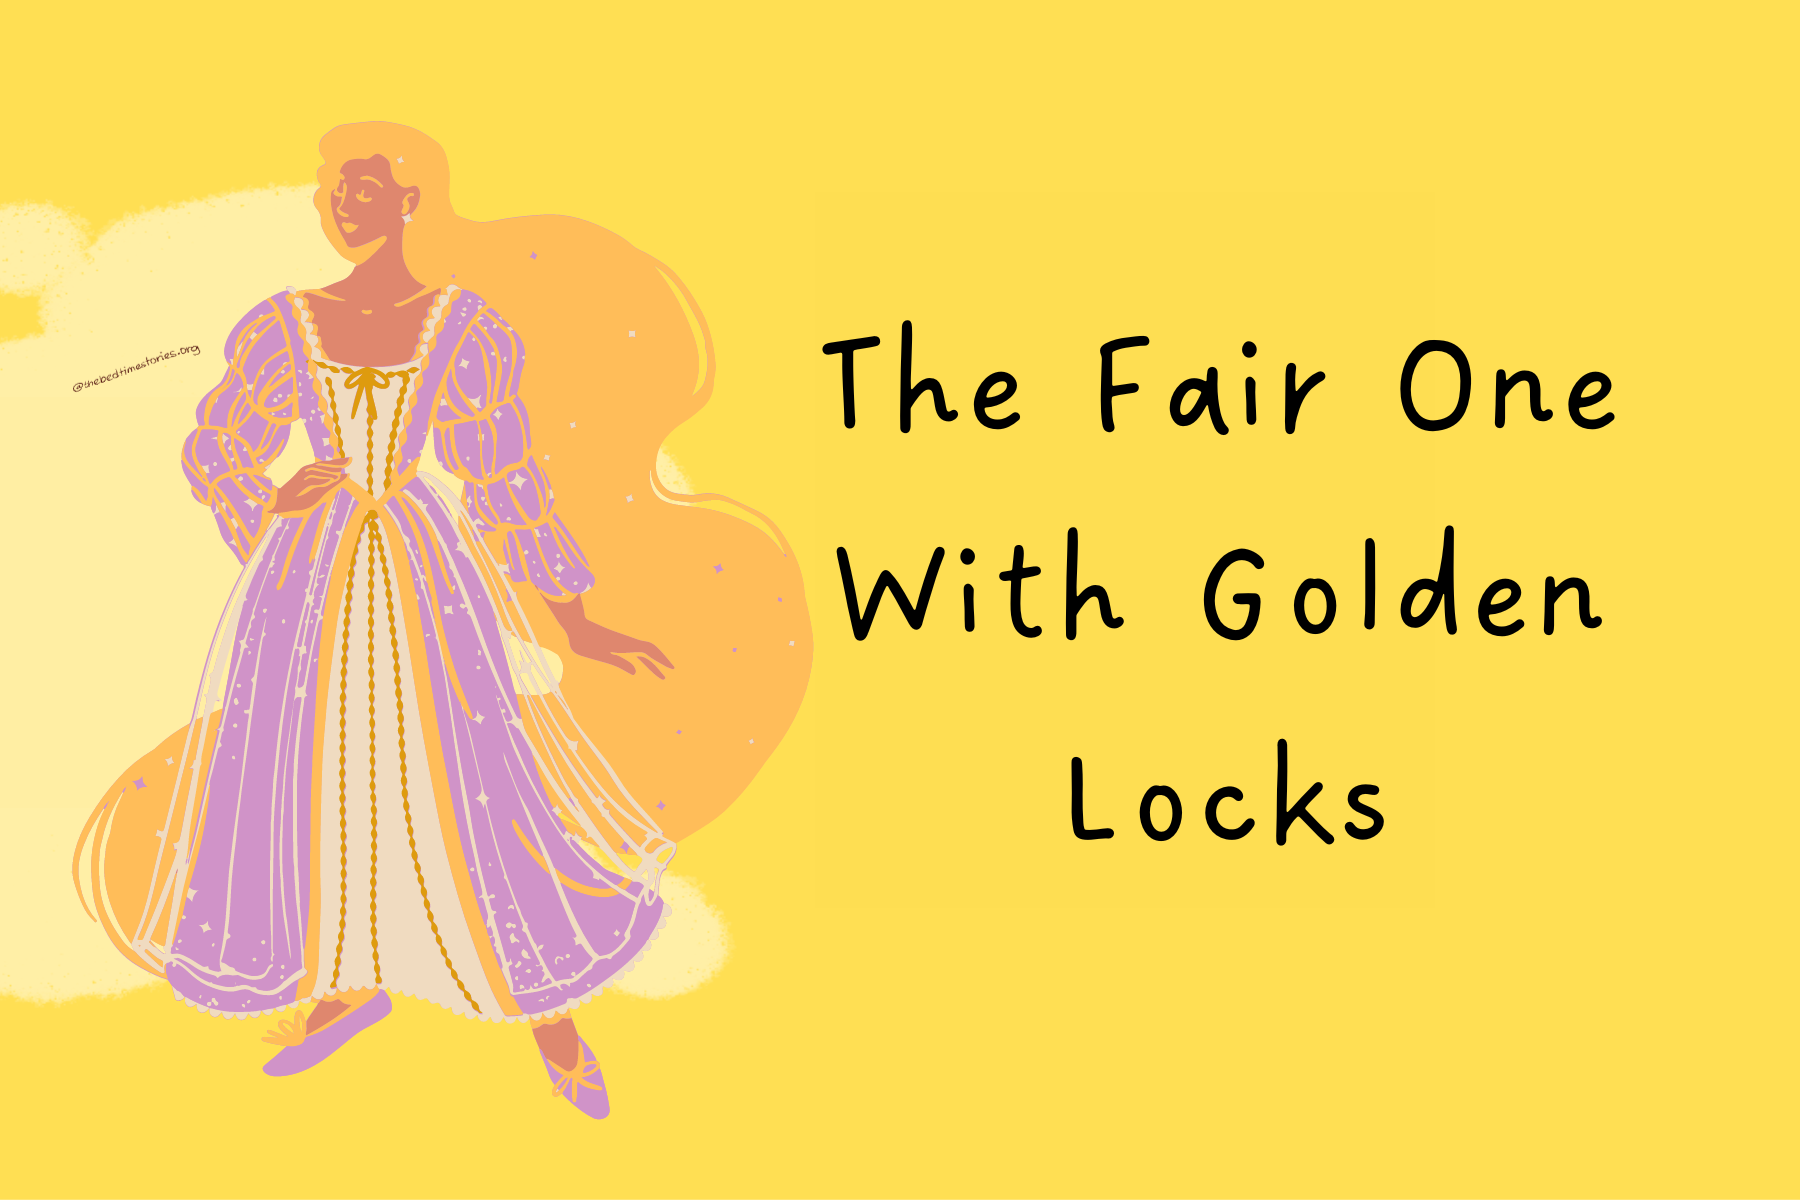 The Fair One With Golden Locks